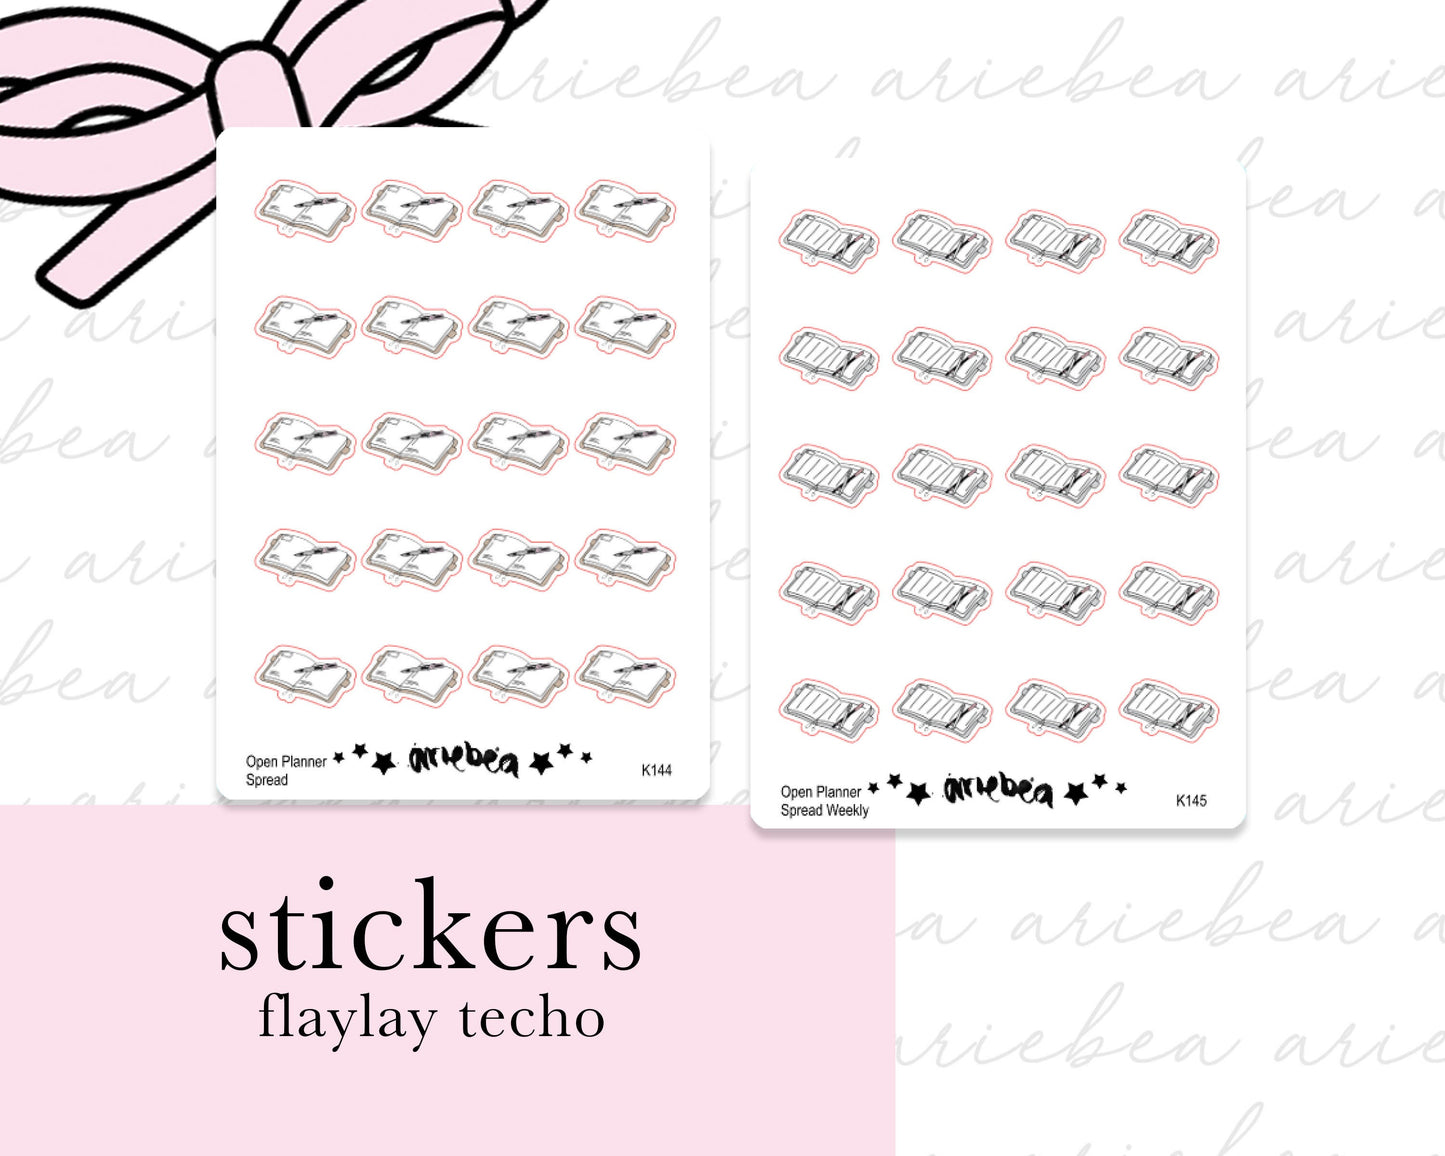 Daily Weekly Techo Spread Planner Stickers